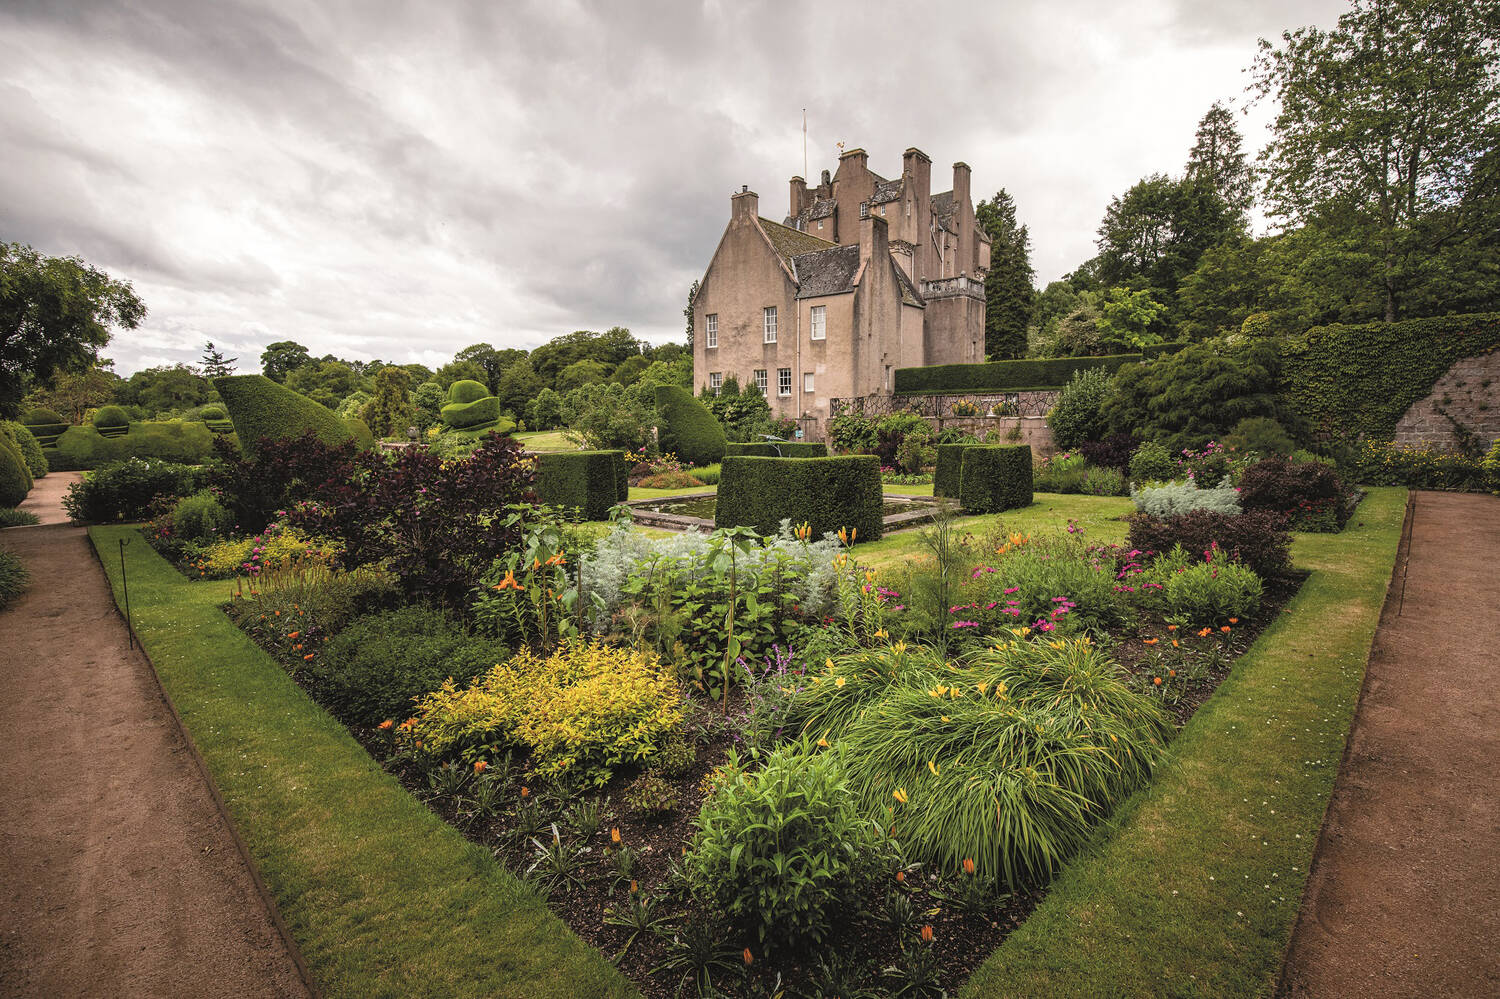 A view of the walled garden at Crathes Castle, looking towards the castle diagonally across a square flower bed. Shaped yew hedges surround a square pool at the centre of the bed, with colourful flower beds around the border. Gravel paths run along the outside.